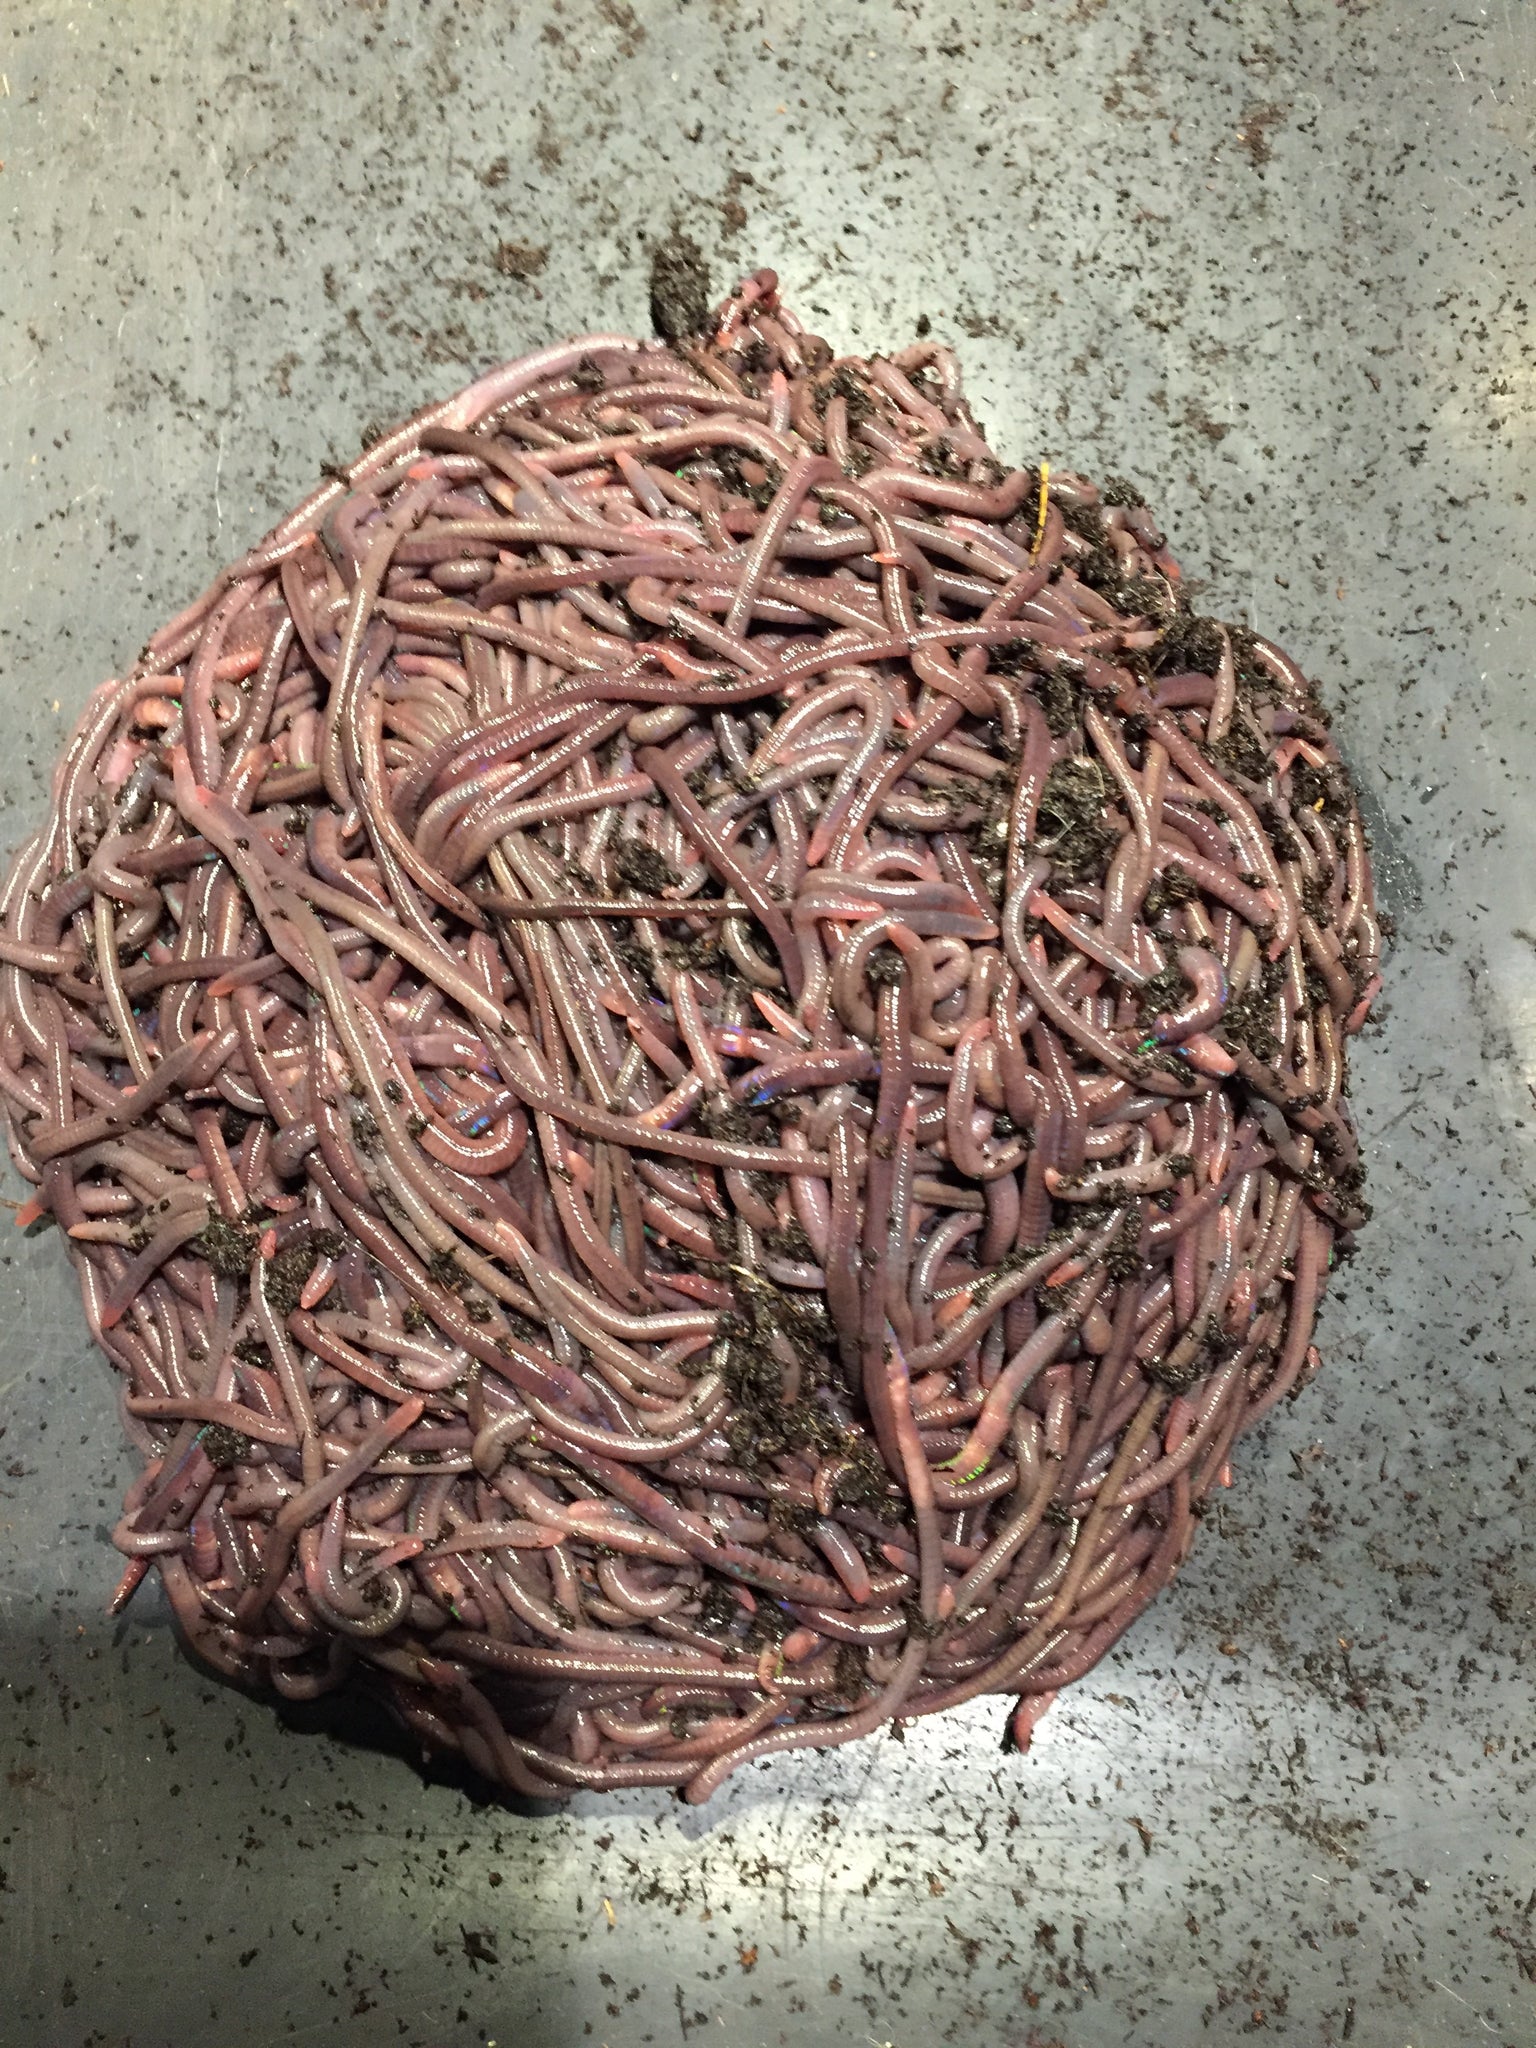 Buy African Nightcrawlers Compositing Worms - Midwest Worms